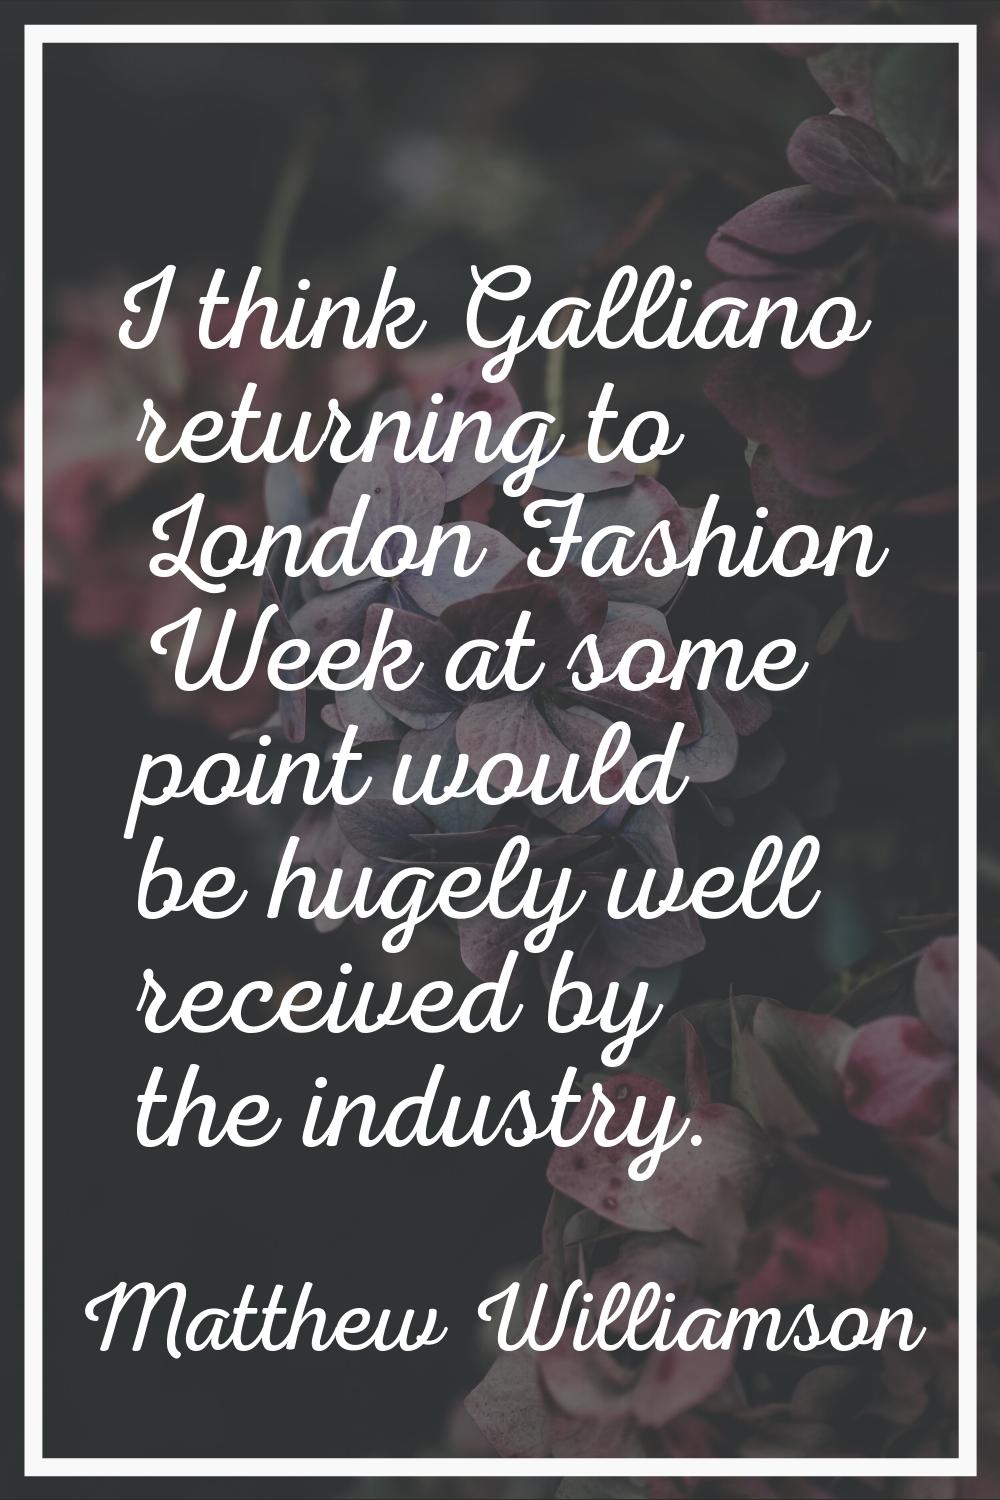 I think Galliano returning to London Fashion Week at some point would be hugely well received by th